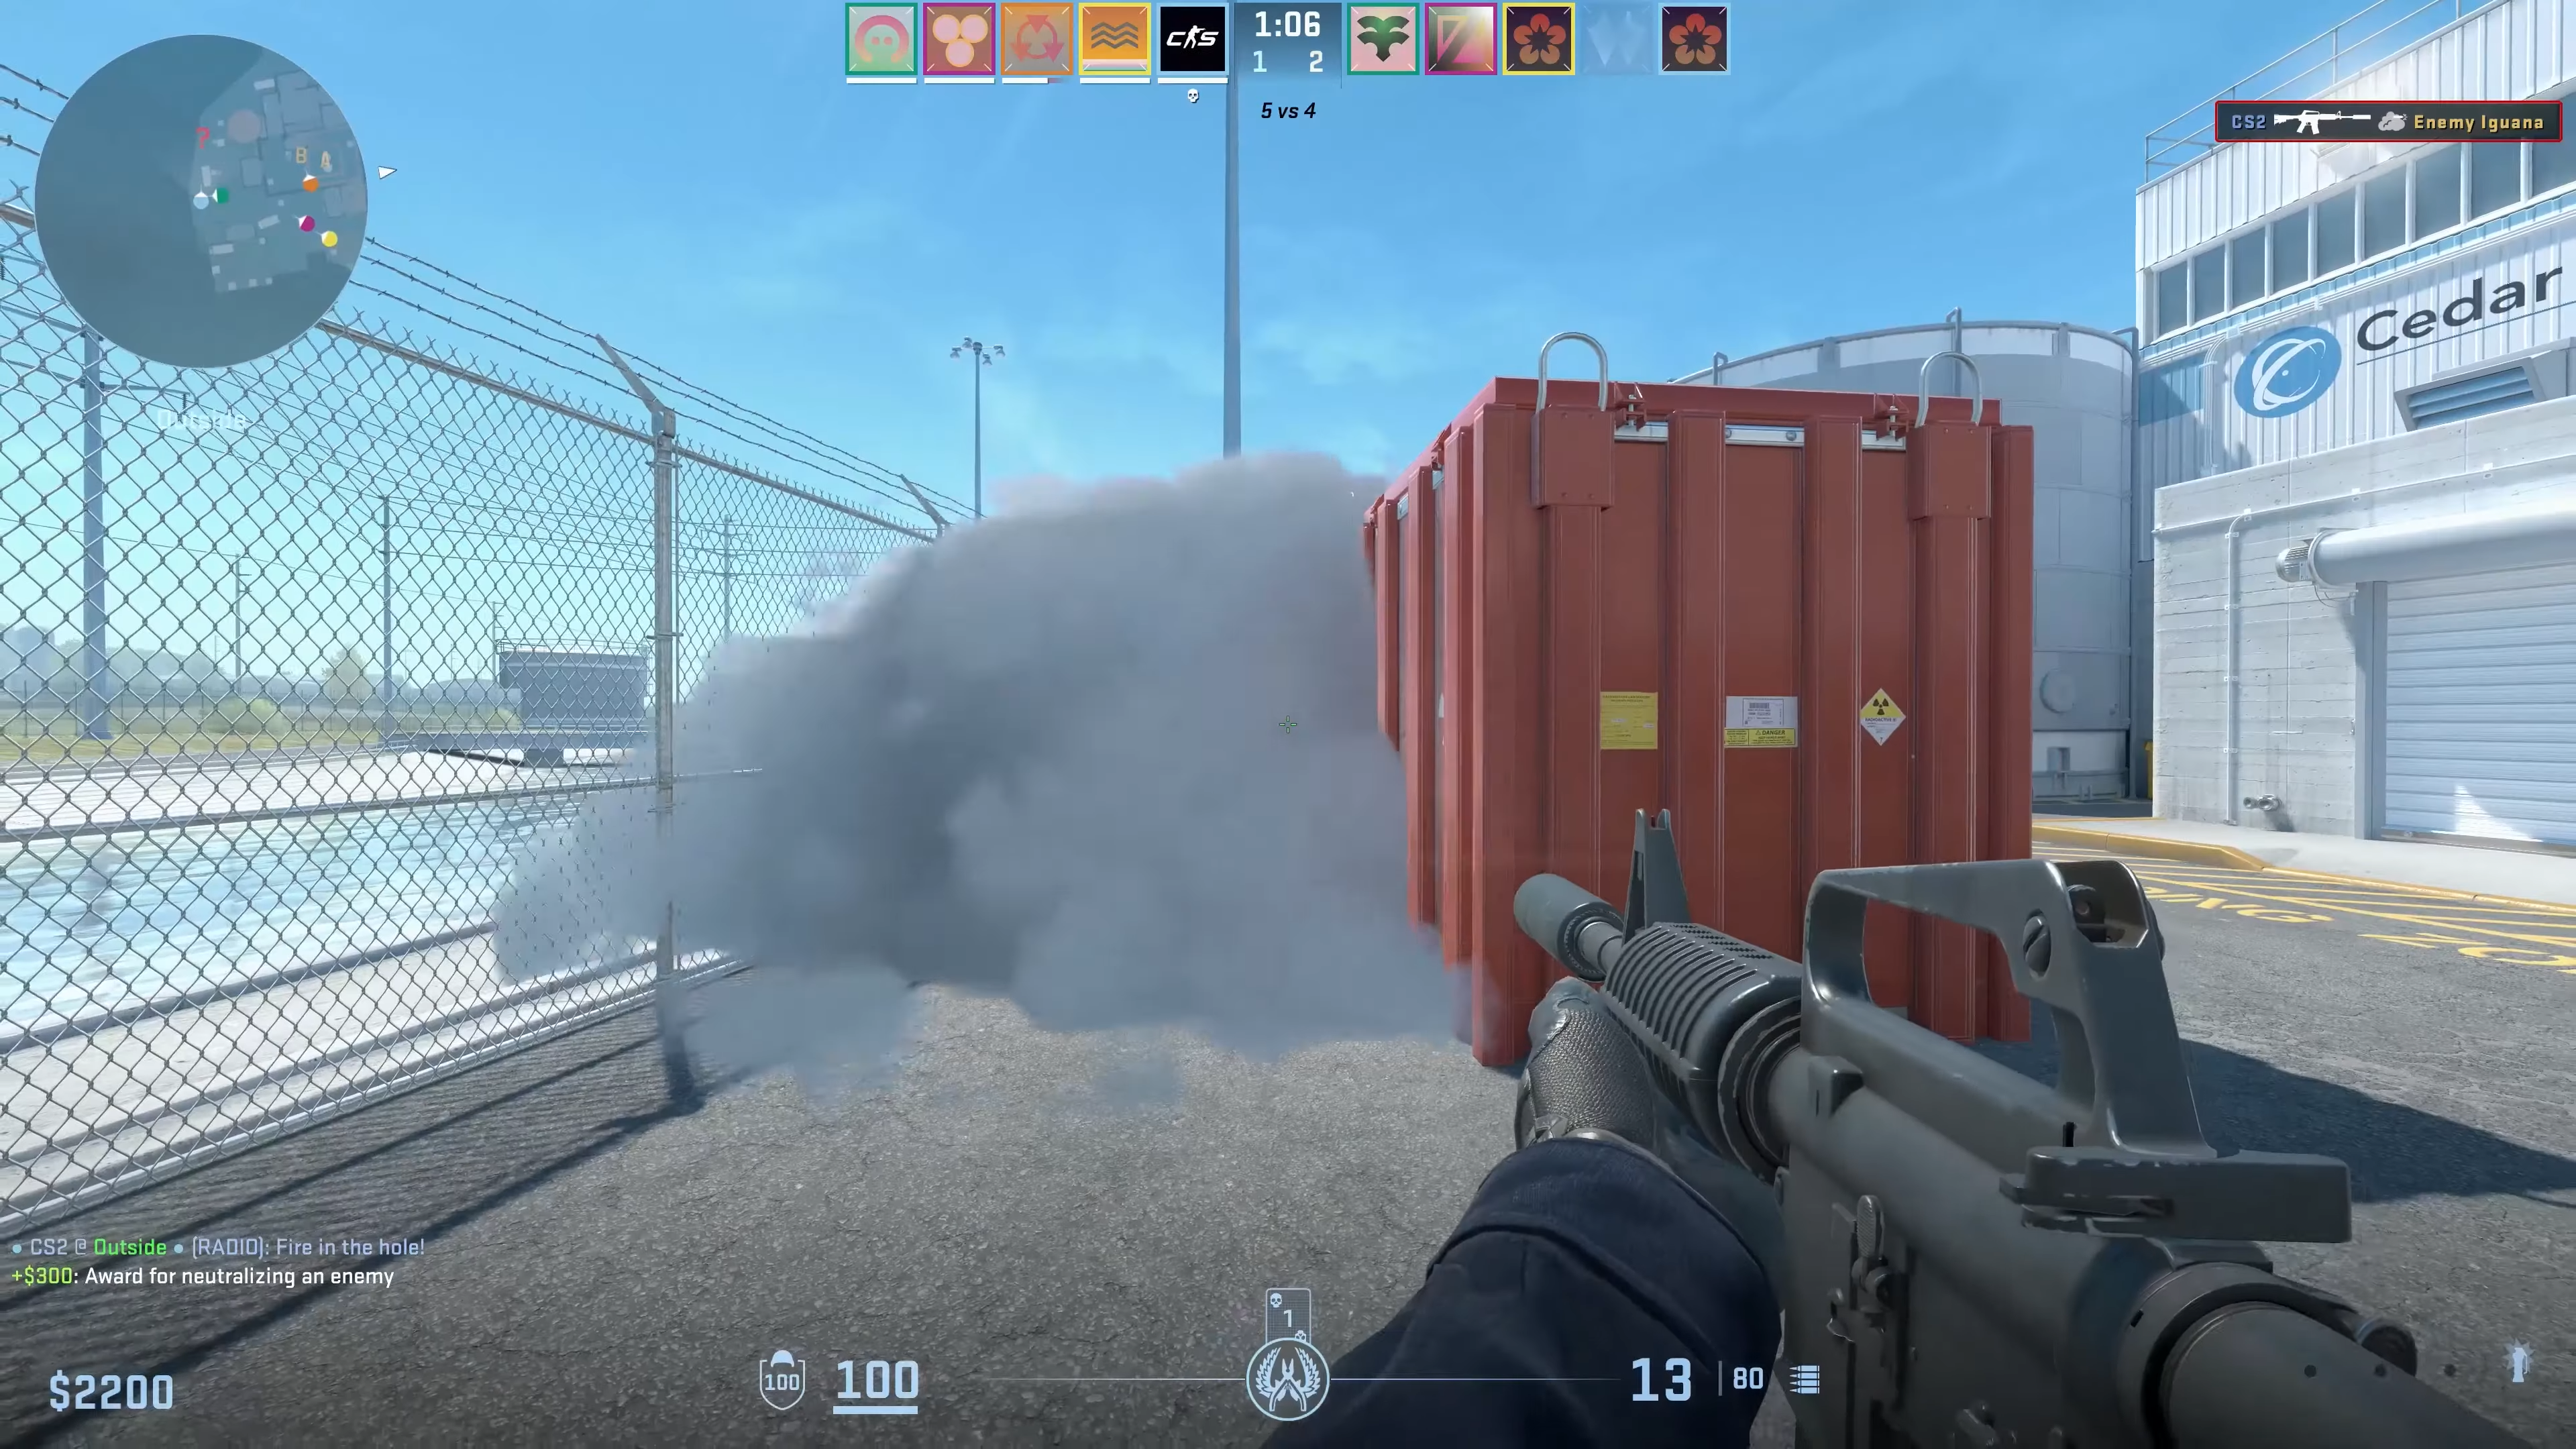 An in-game screenshot from Counter-Strike 2 showing off the game's new volumetric smoke grenade clouds.